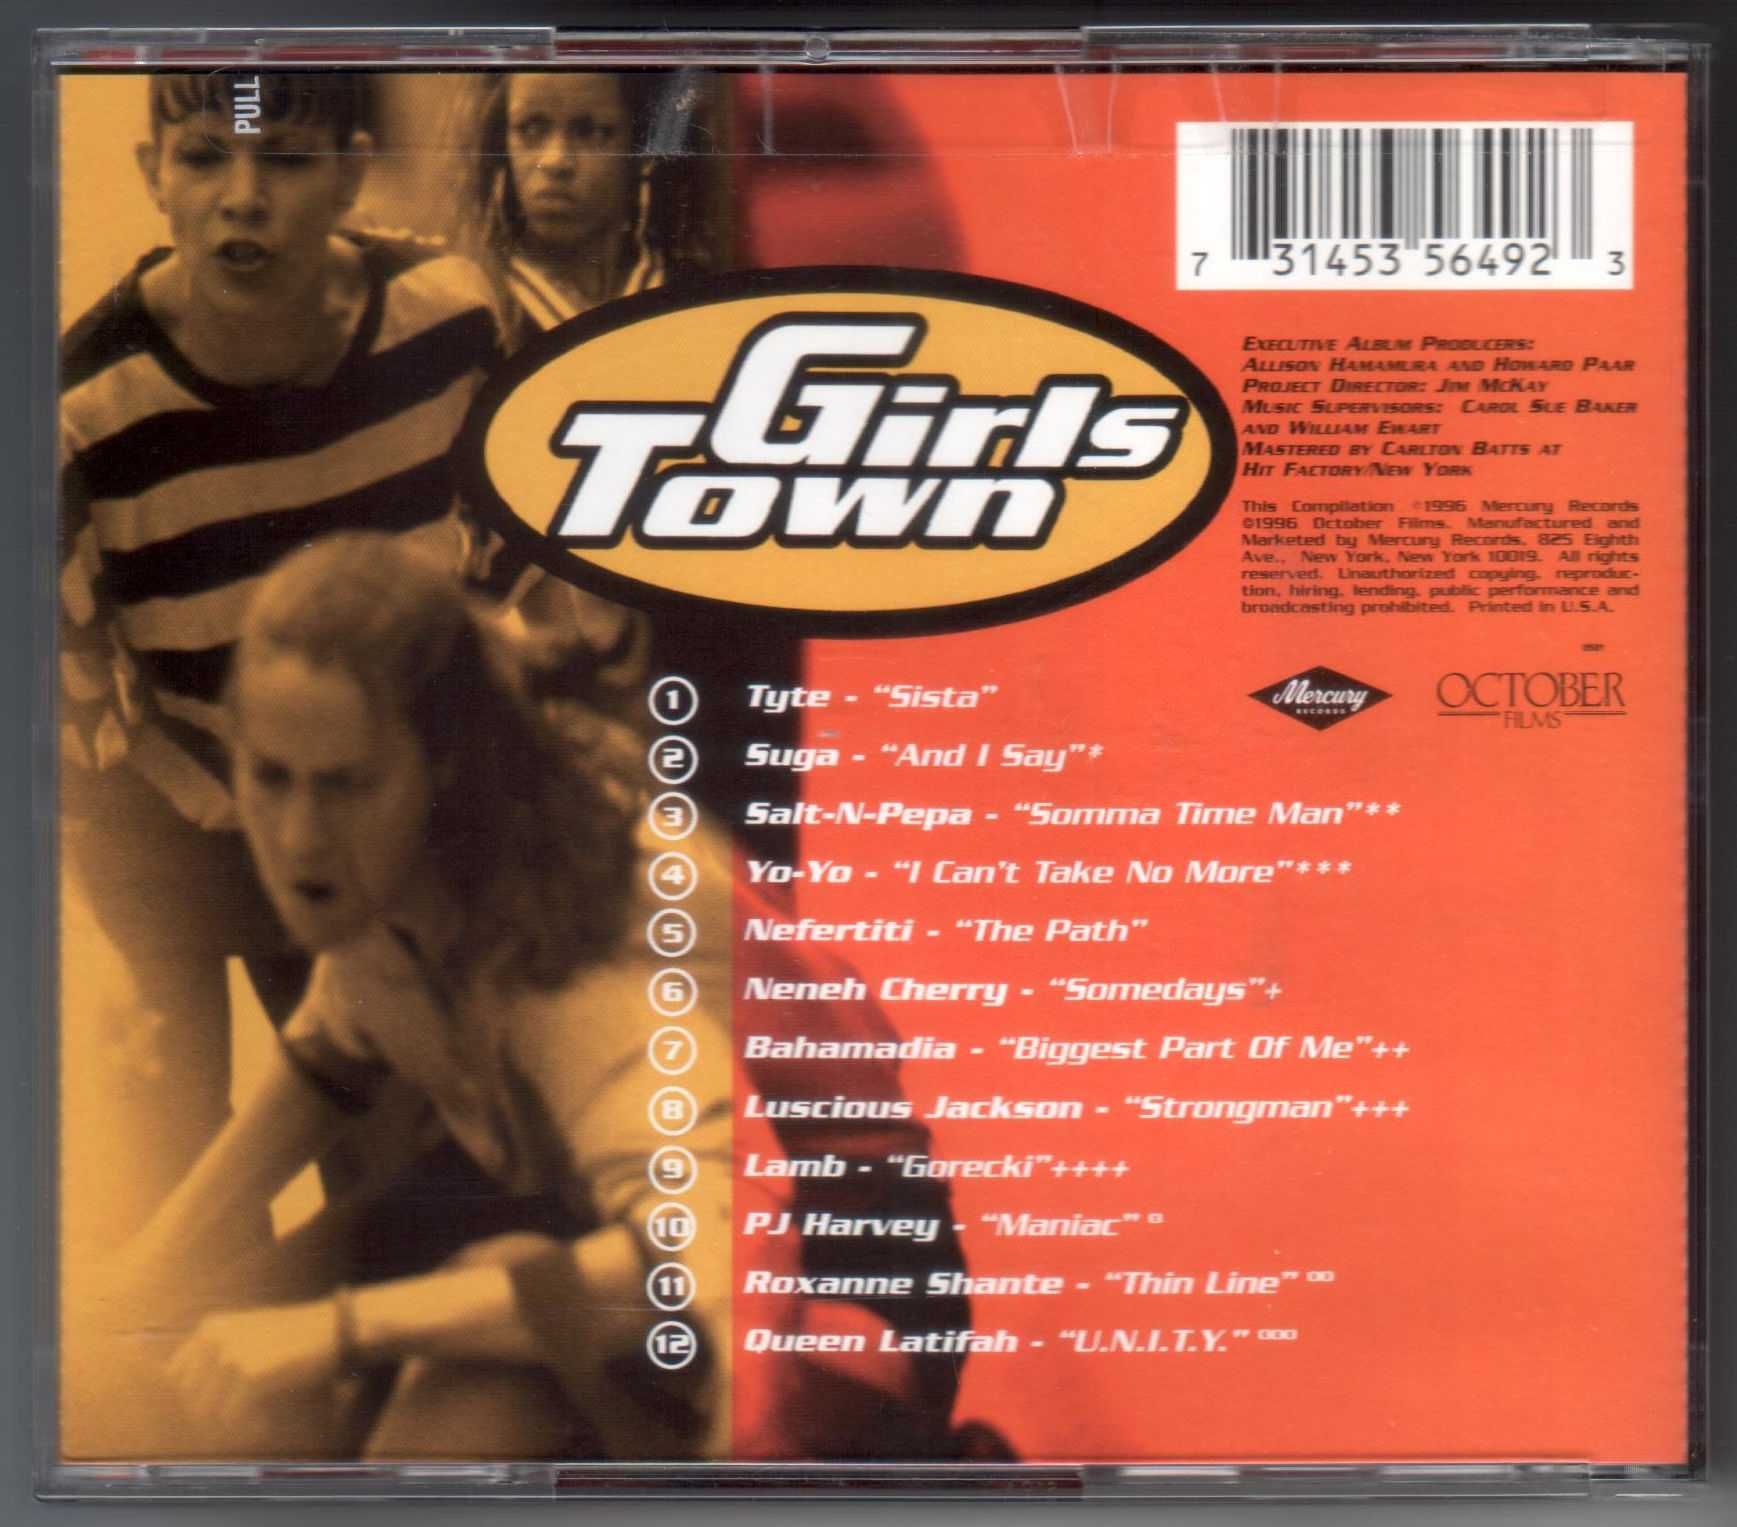 CD Girls Town - Original Motion Picture Soundtrack